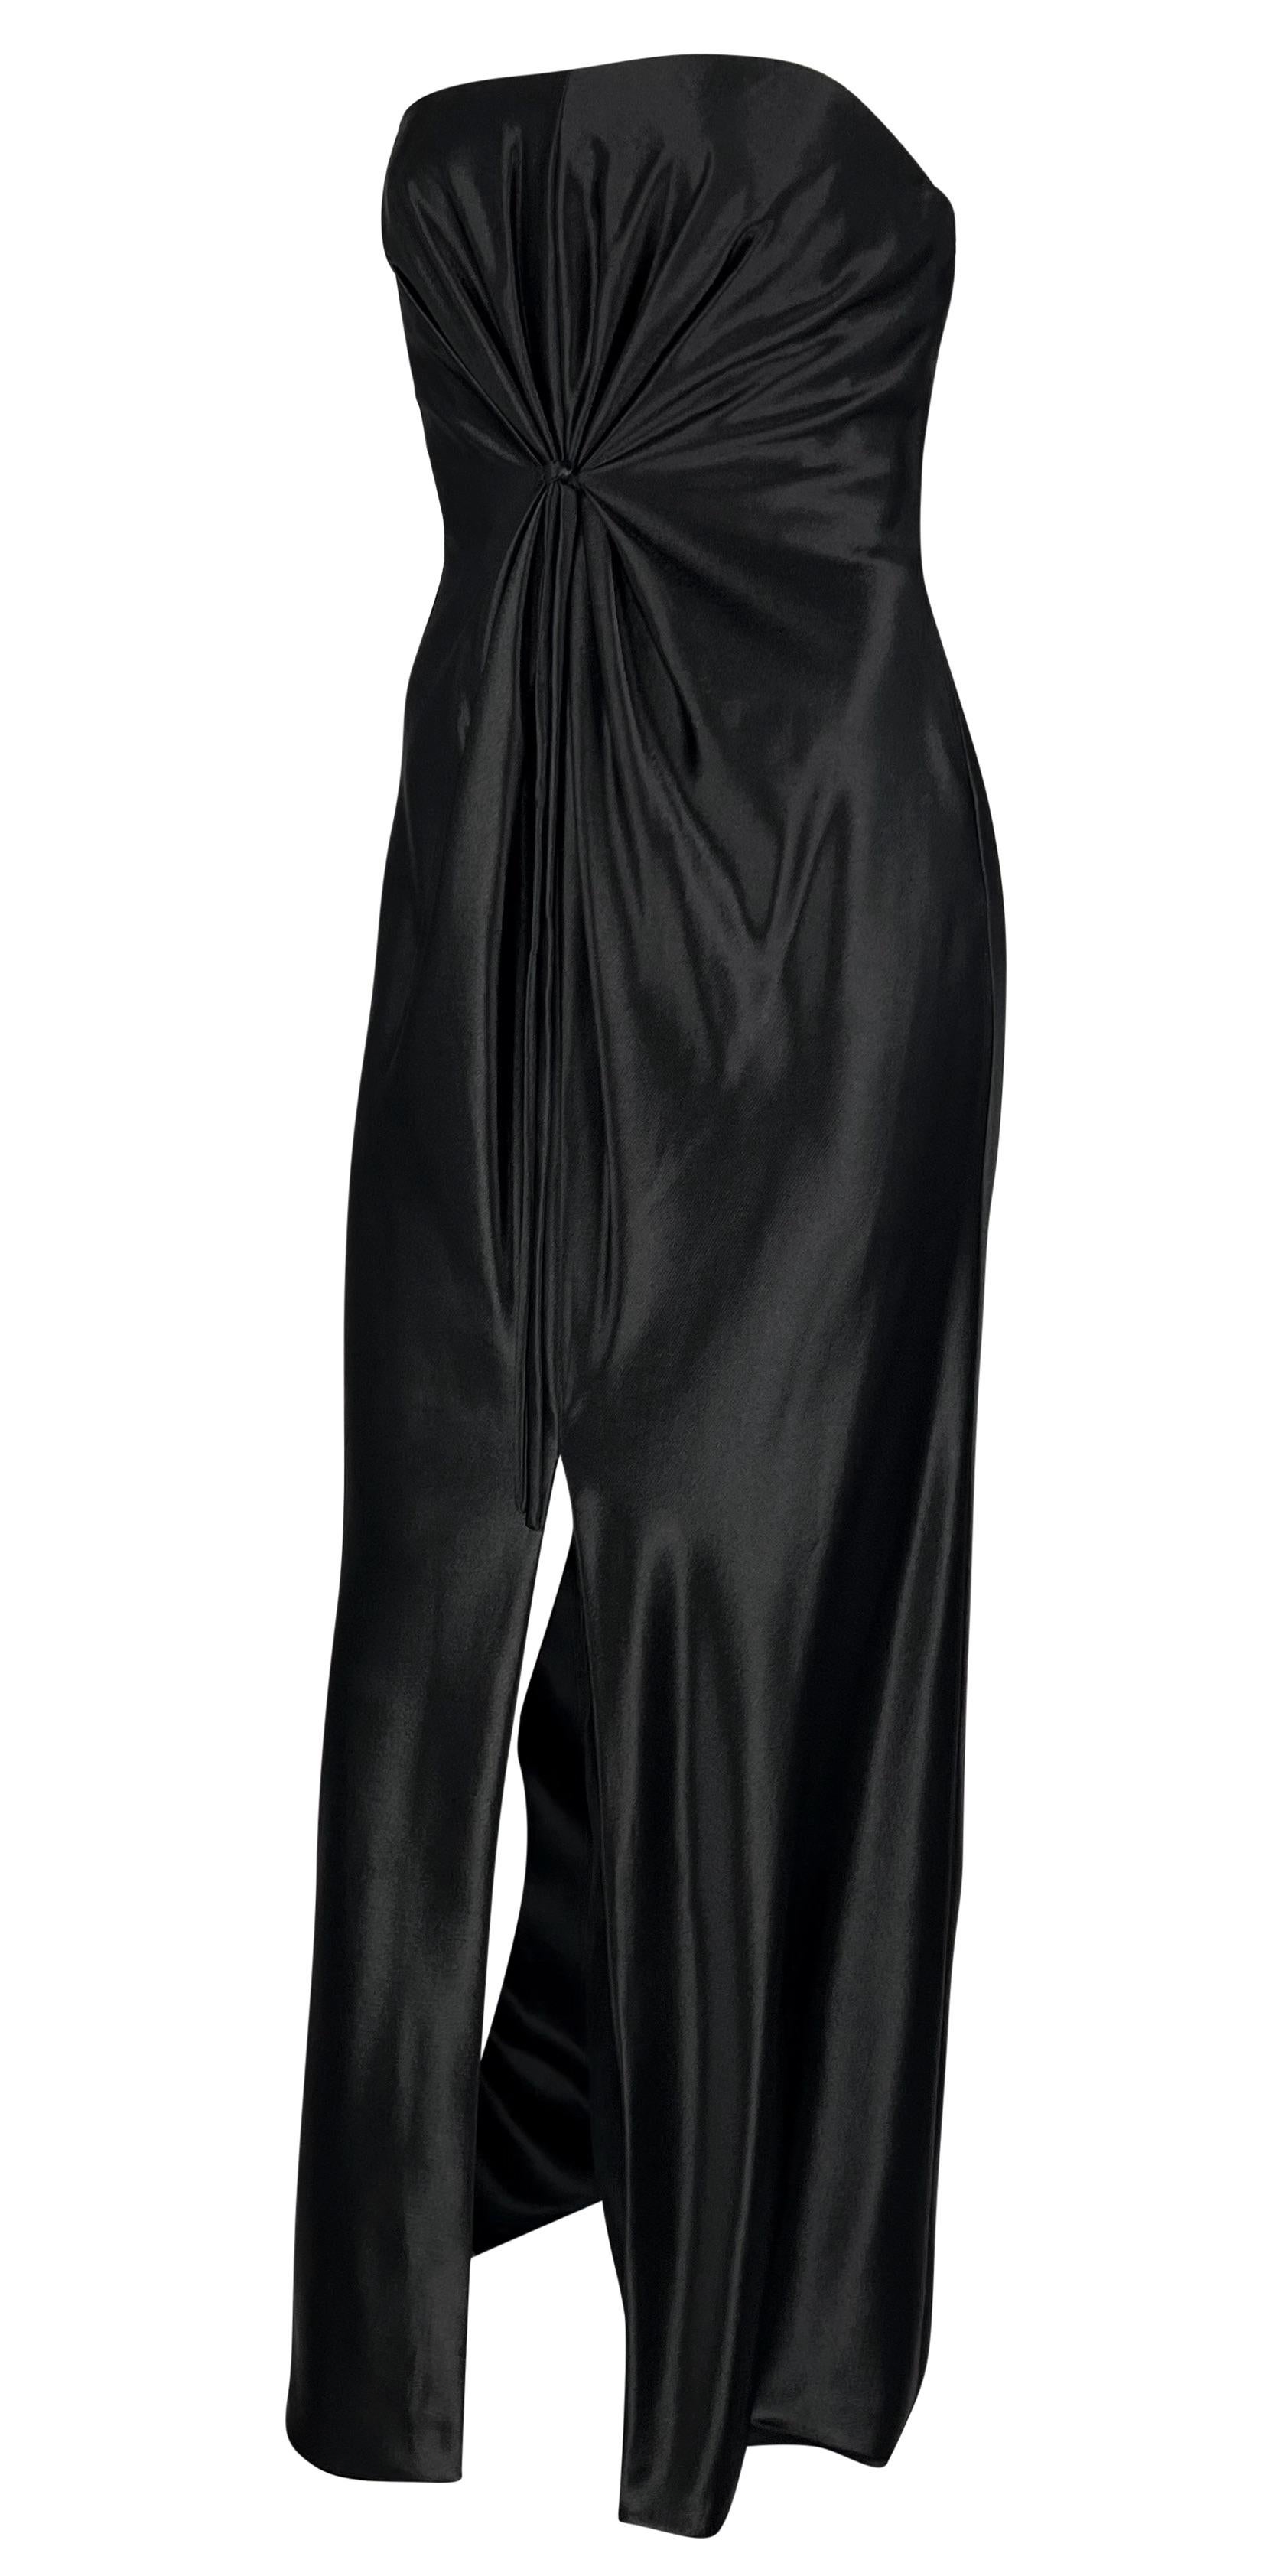 F/W 1997 Gianni Versace Strapless Satin Tie-Front Black Gown For Sale 1